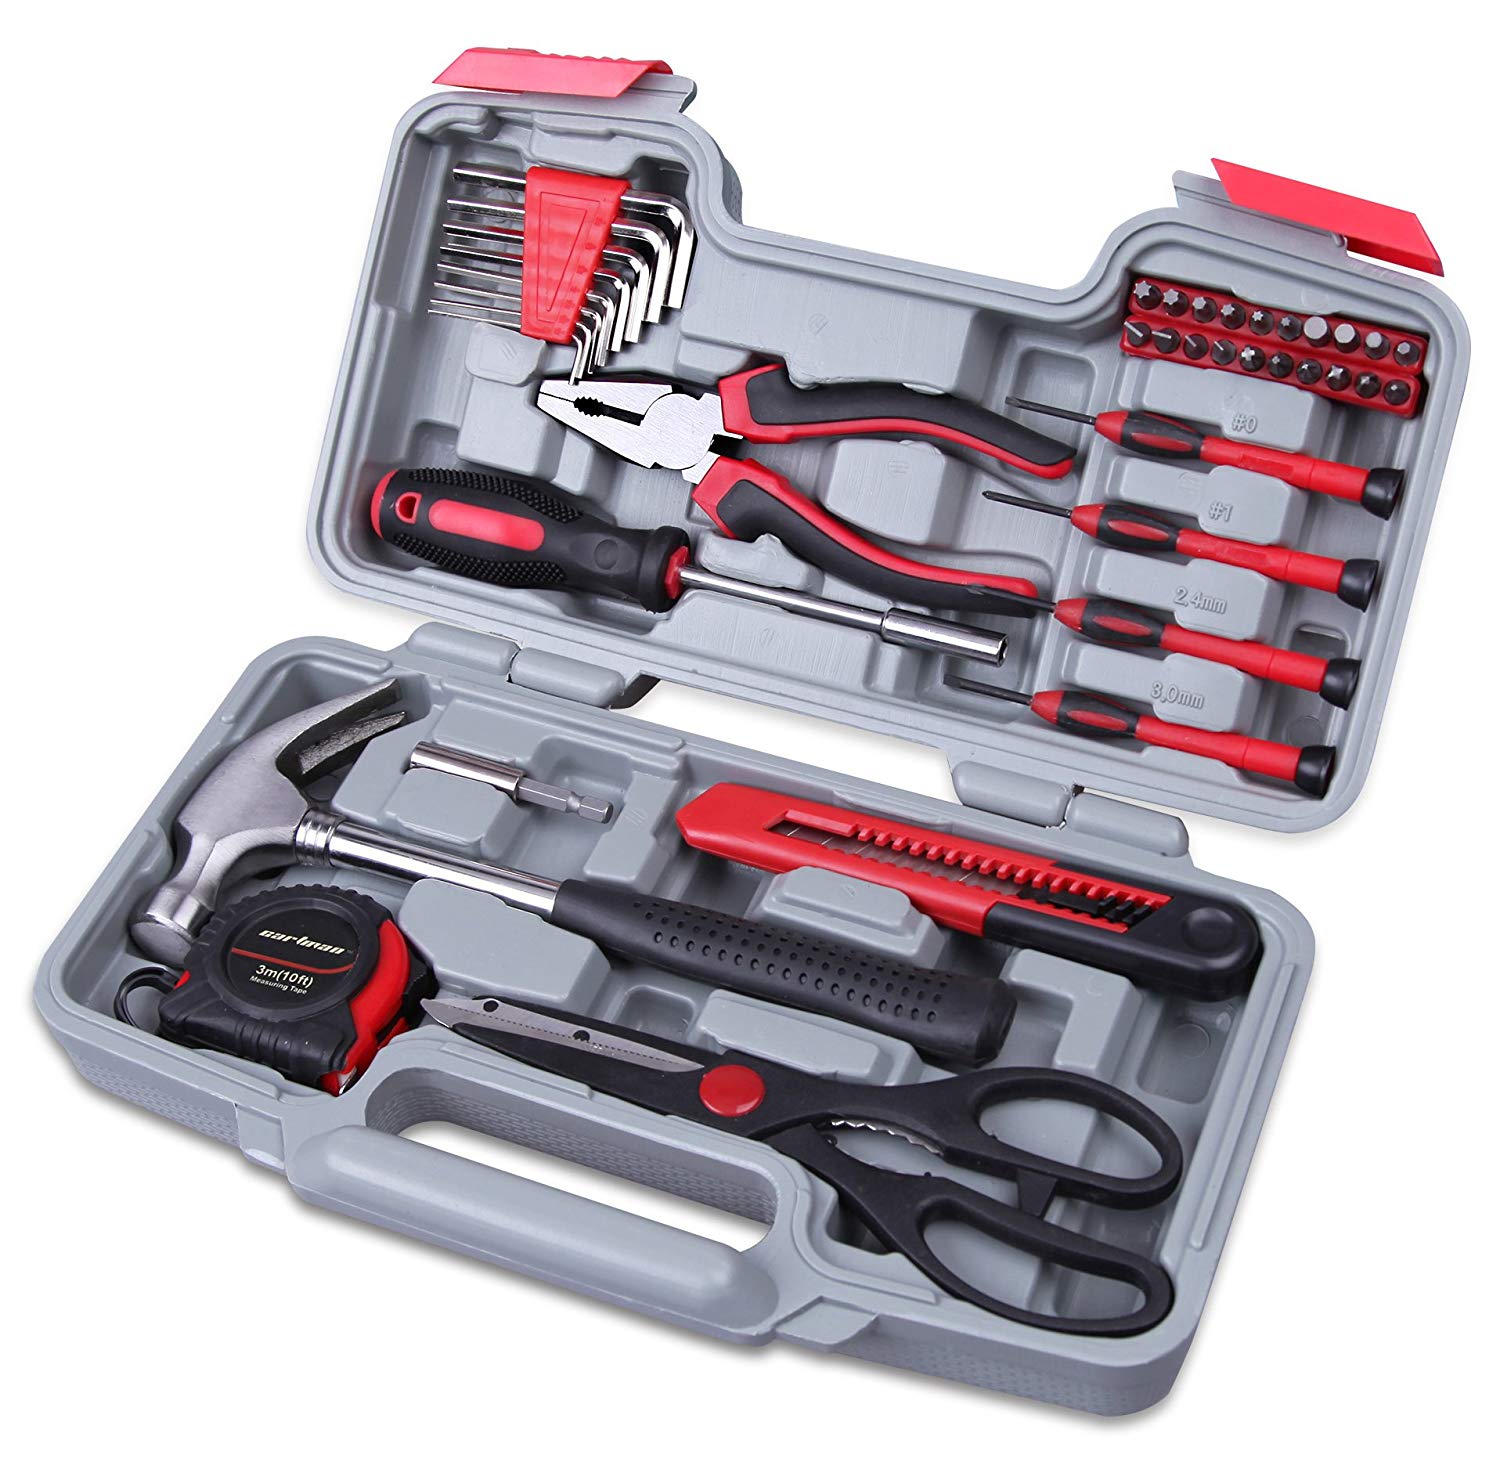 CARTMAN Red 39-Piece Cutting Plier and General Household Hand Tool